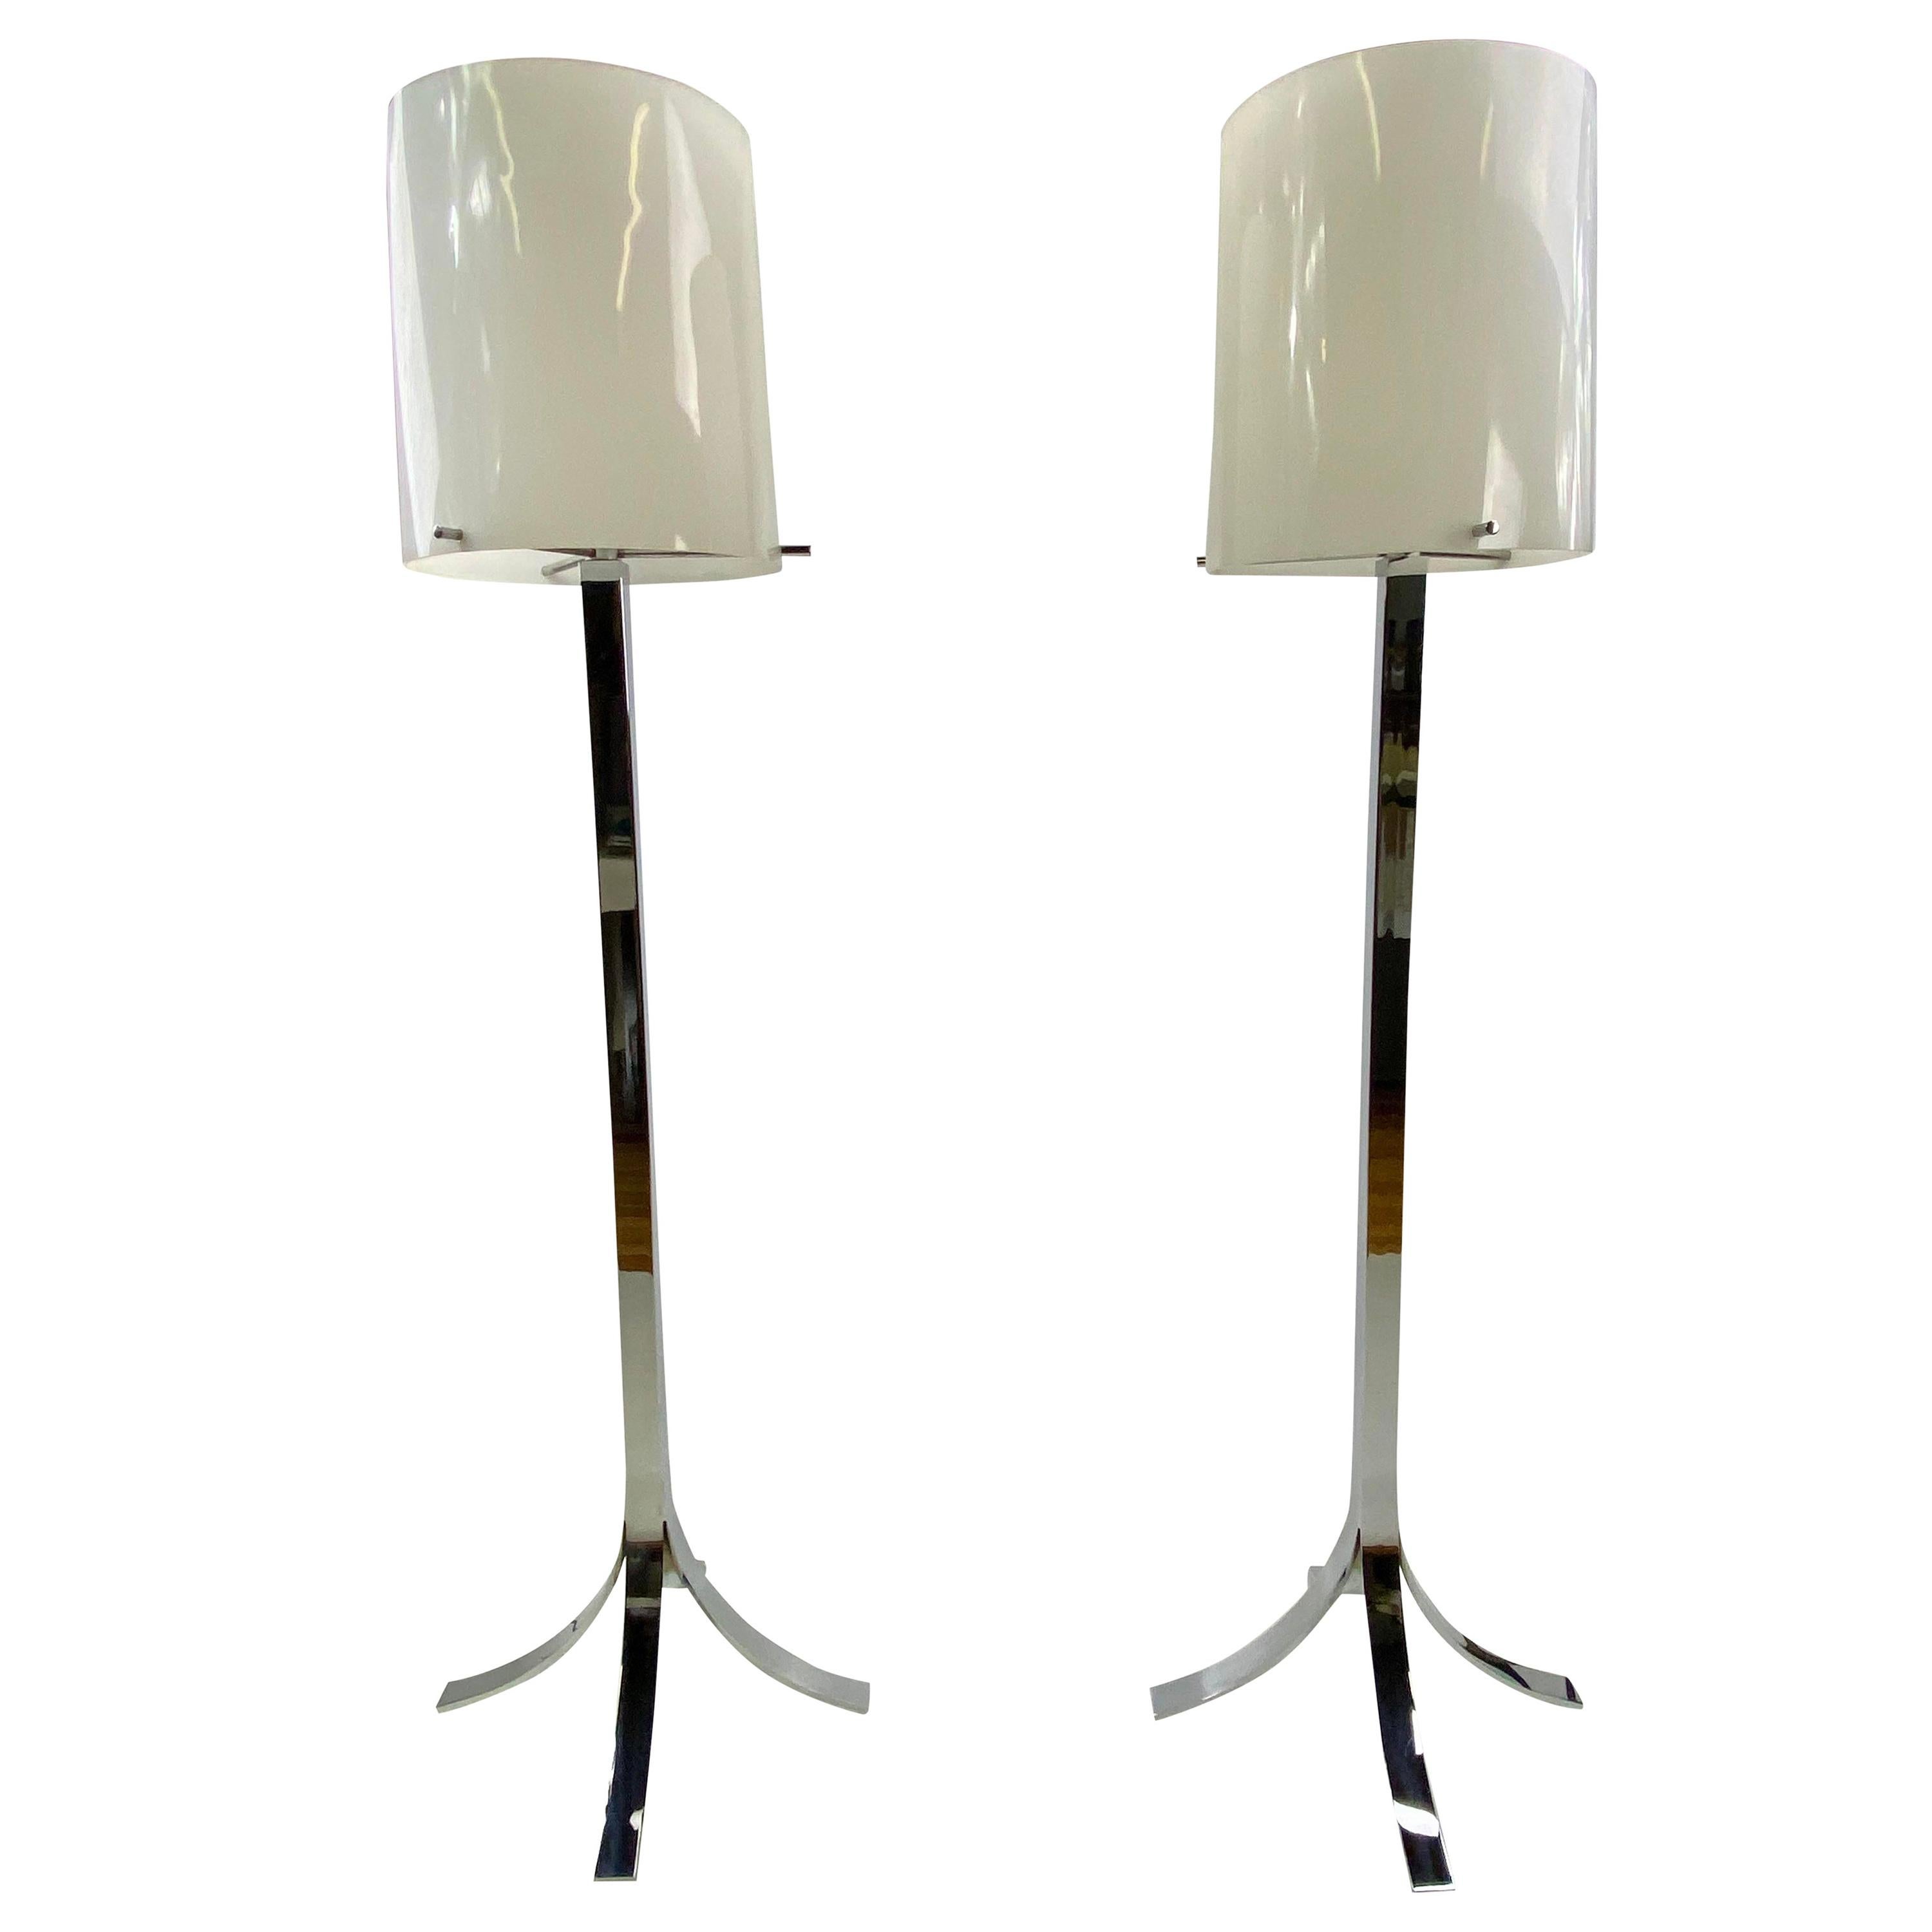 Mid-Century Modern Stainless Chrome Floor Lamps, a Pair